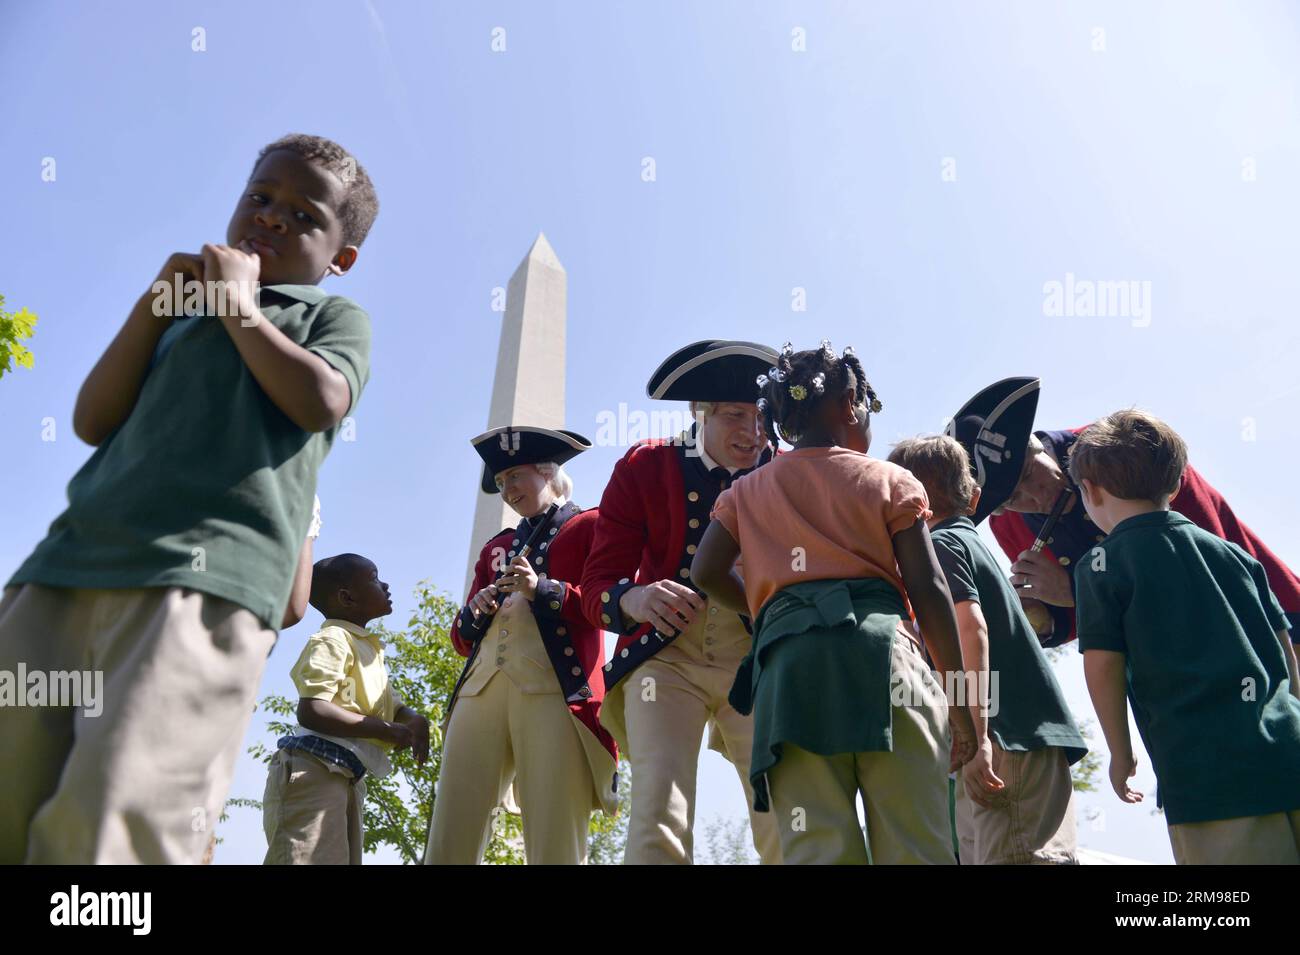 (140512) -- WASHINGTON D.C., May 12, 2014 (Xinhua) -- Children play with soldiers of a military band attending the reopening ceremony of the Washington Monument, in Washington D.C., the United States, on May 12, 2014. The iconic Washington Monument in this American national capital on Monday reopened on completion of 32-month repairs with a cost of 15 million U.S. dollars.(Xinhua/Yin Bogu) U.S.-WASHINGTON MONUMENT-REOPENING PUBLICATIONxNOTxINxCHN   Washington D C May 12 2014 XINHUA Children Play With Soldiers of a Military Tie attending The Reopening Ceremony of The Washington Monument in Wash Stock Photo